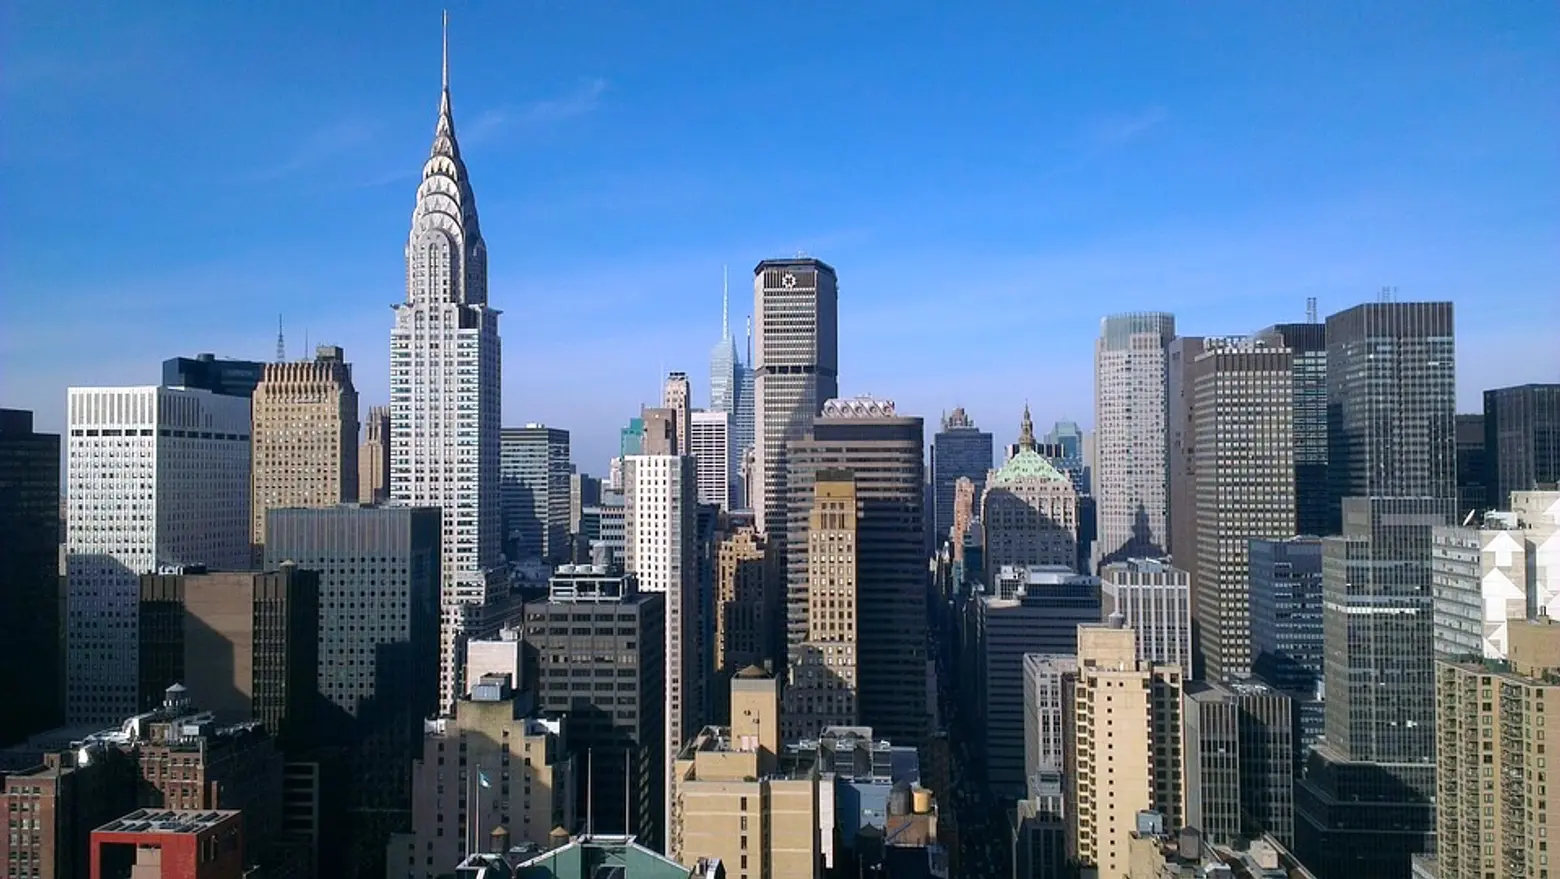 NY real estate groups file lawsuit challenging new rent laws, calling them ‘unconstitutional’